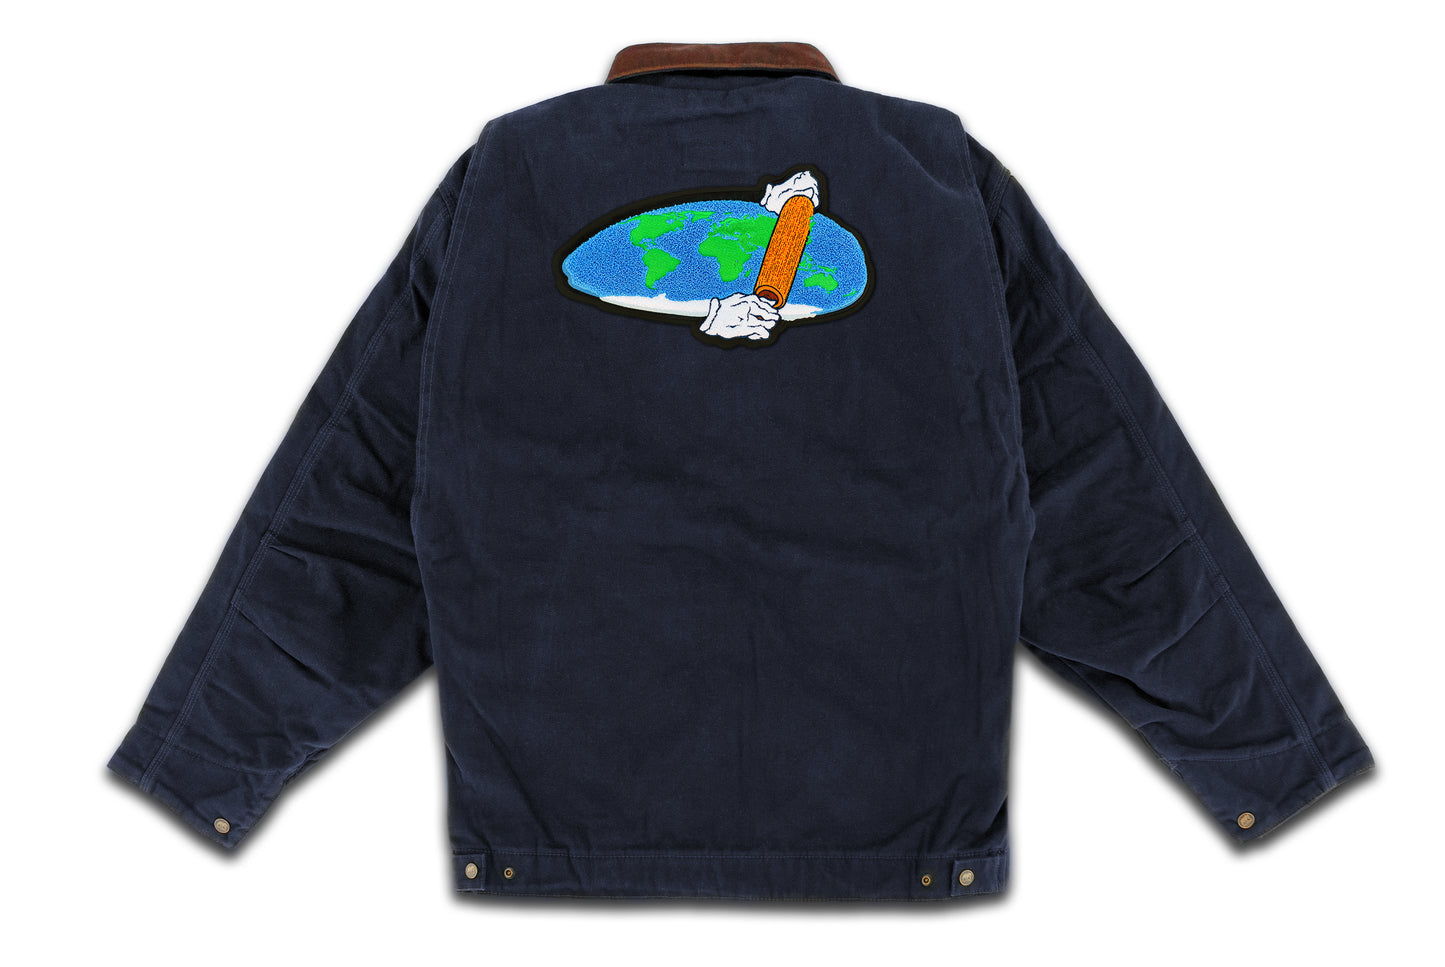 Flat Earth Theory Patch on Gasoline Jacket